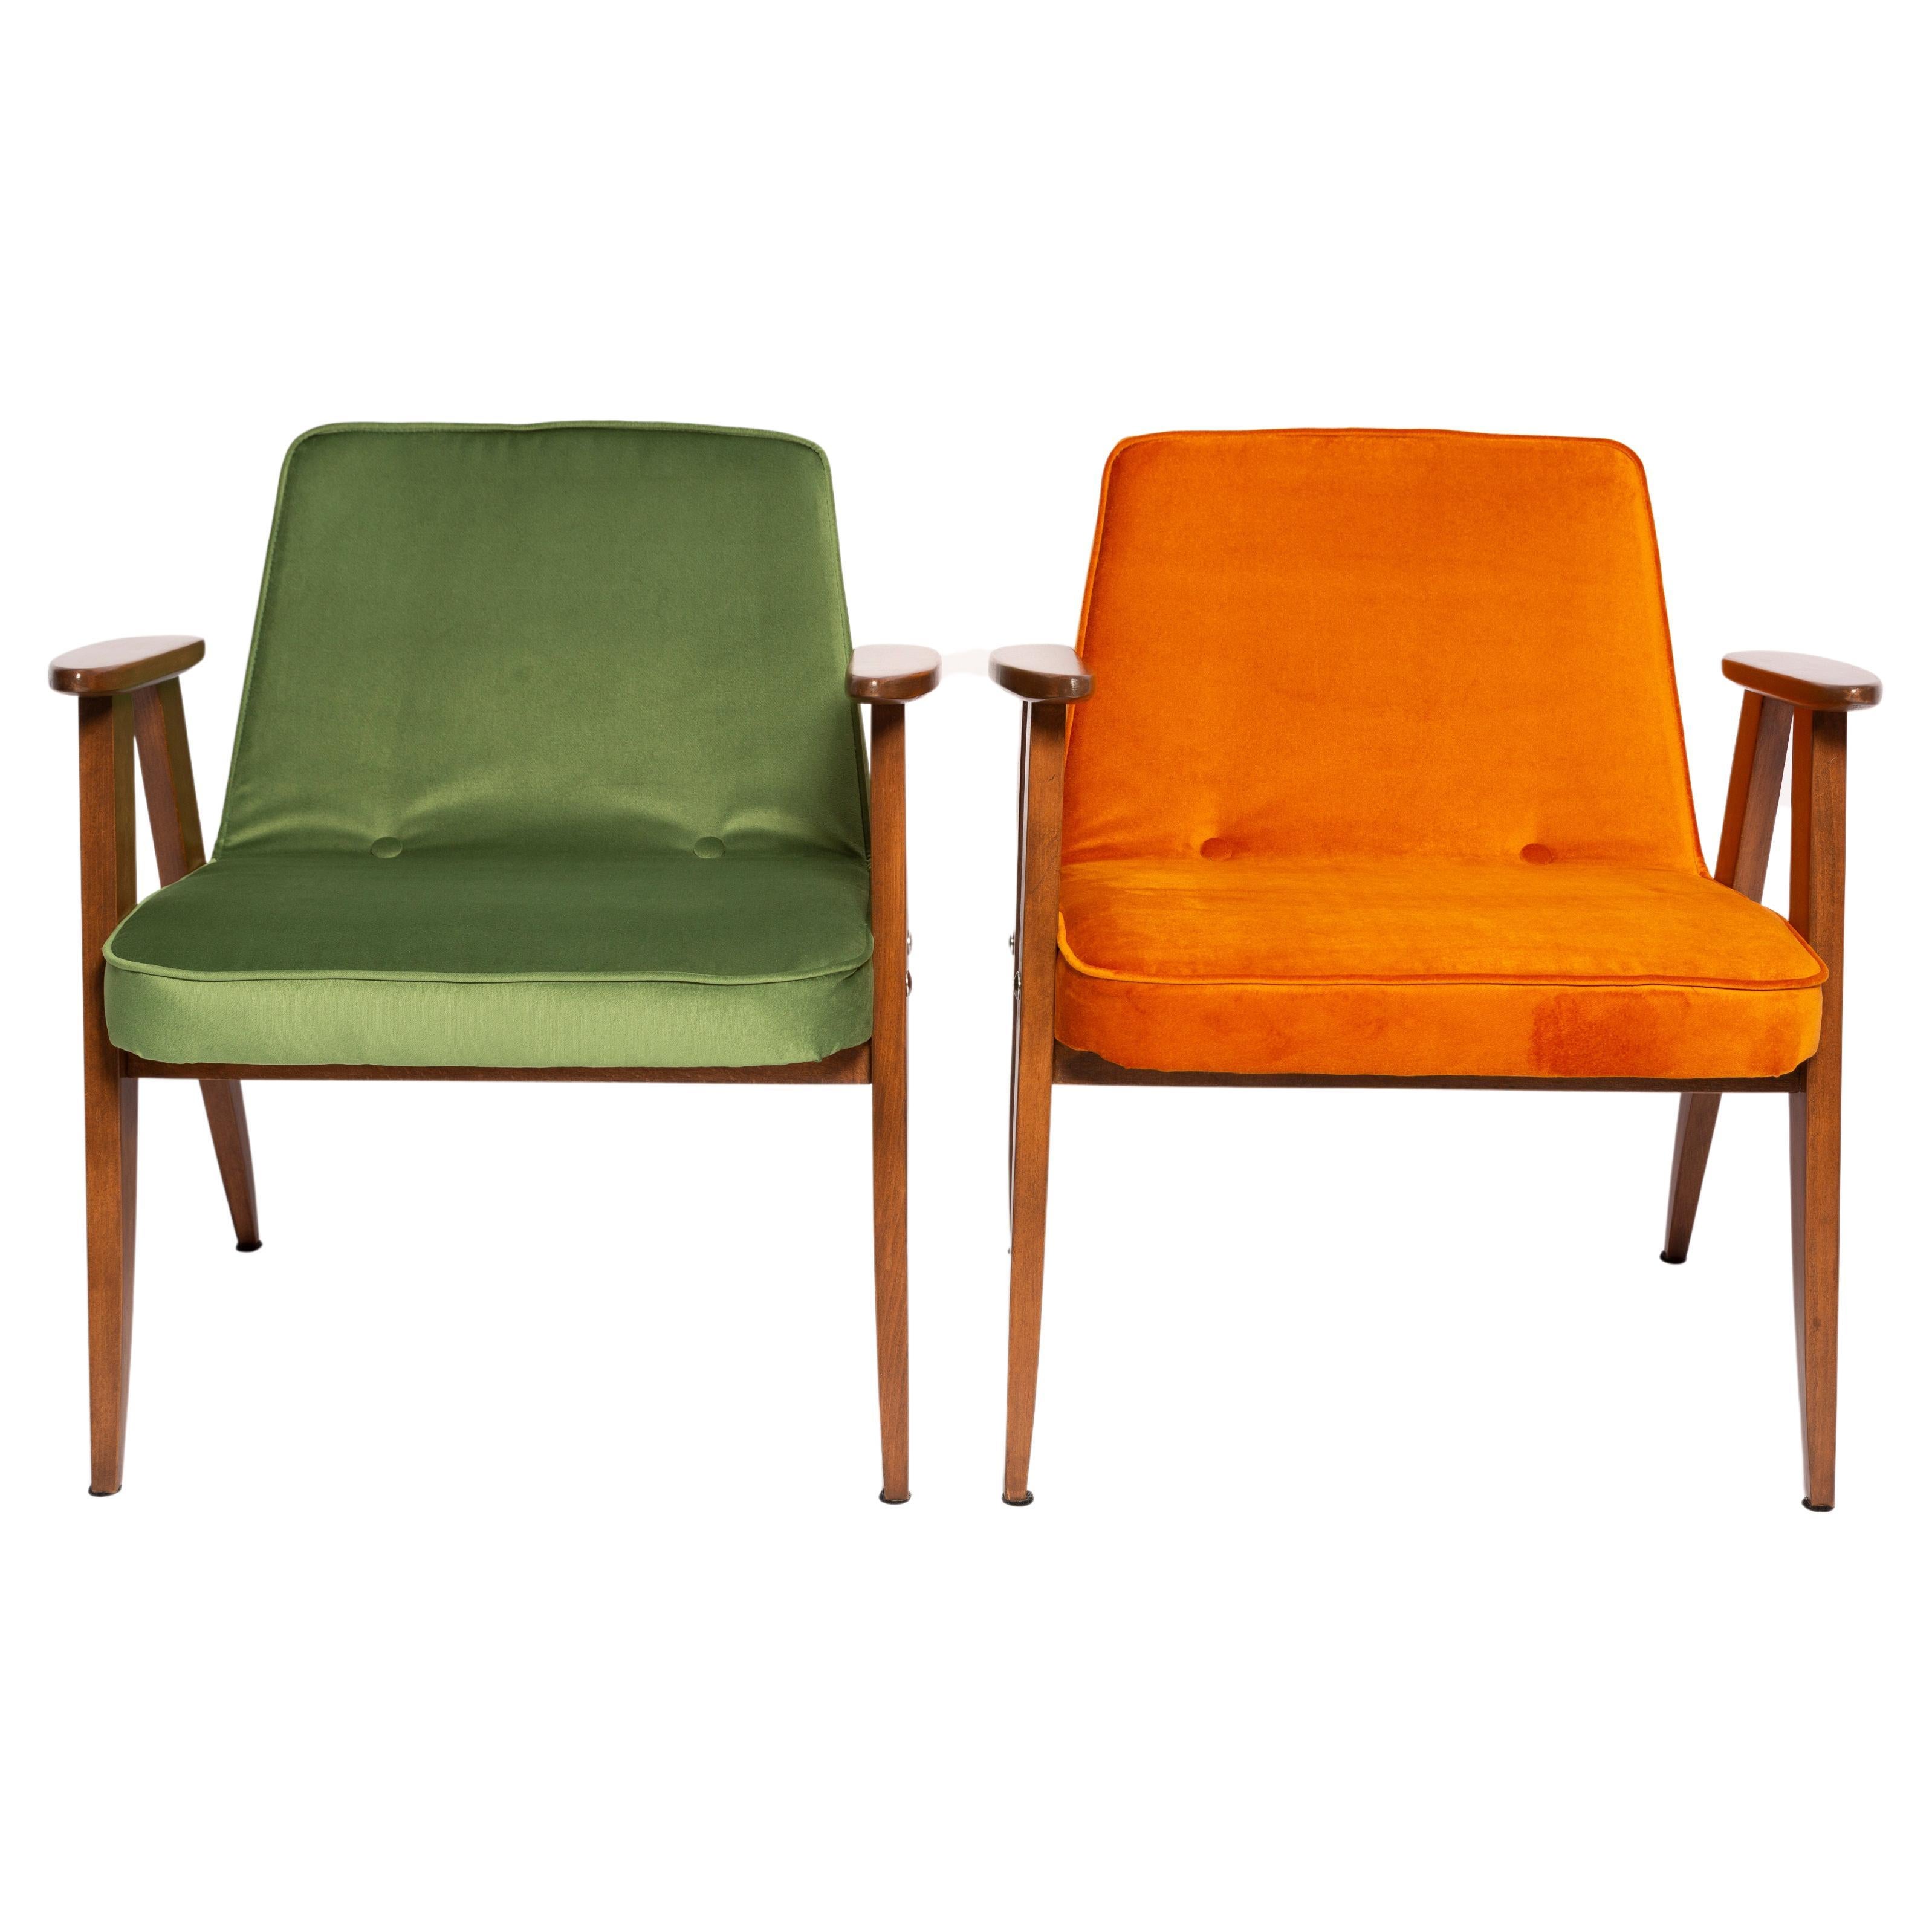 Pair of Mid-Century 366 Armchairs, Green and Orange, by Chierowski Europe, 1960s For Sale